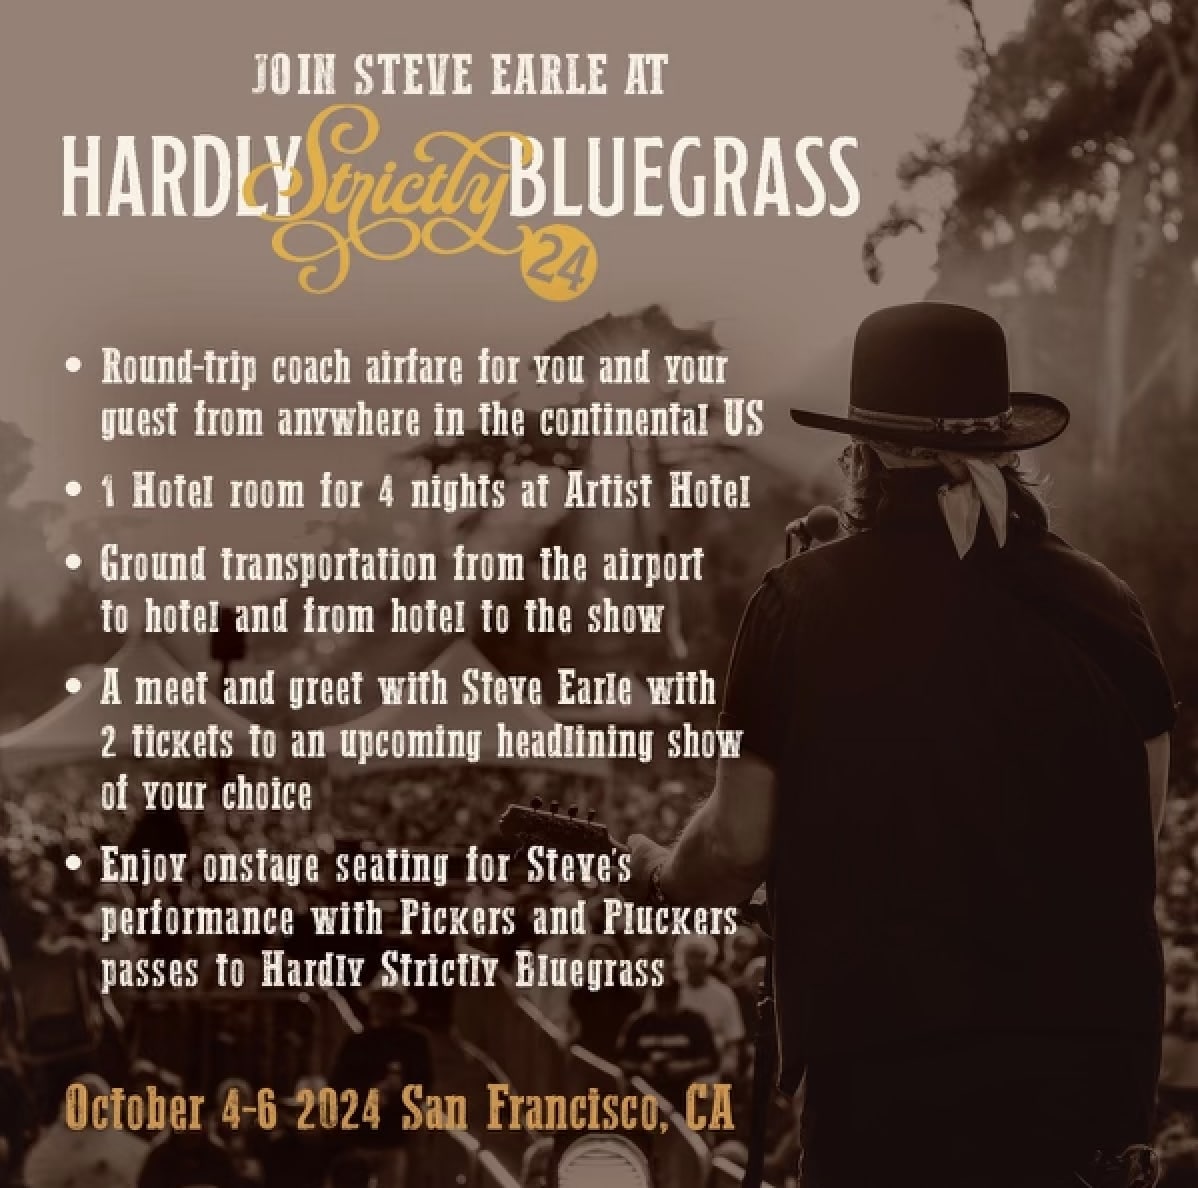 Hardly Strictly Bluegrass 2024 in San Francisco, California, USA